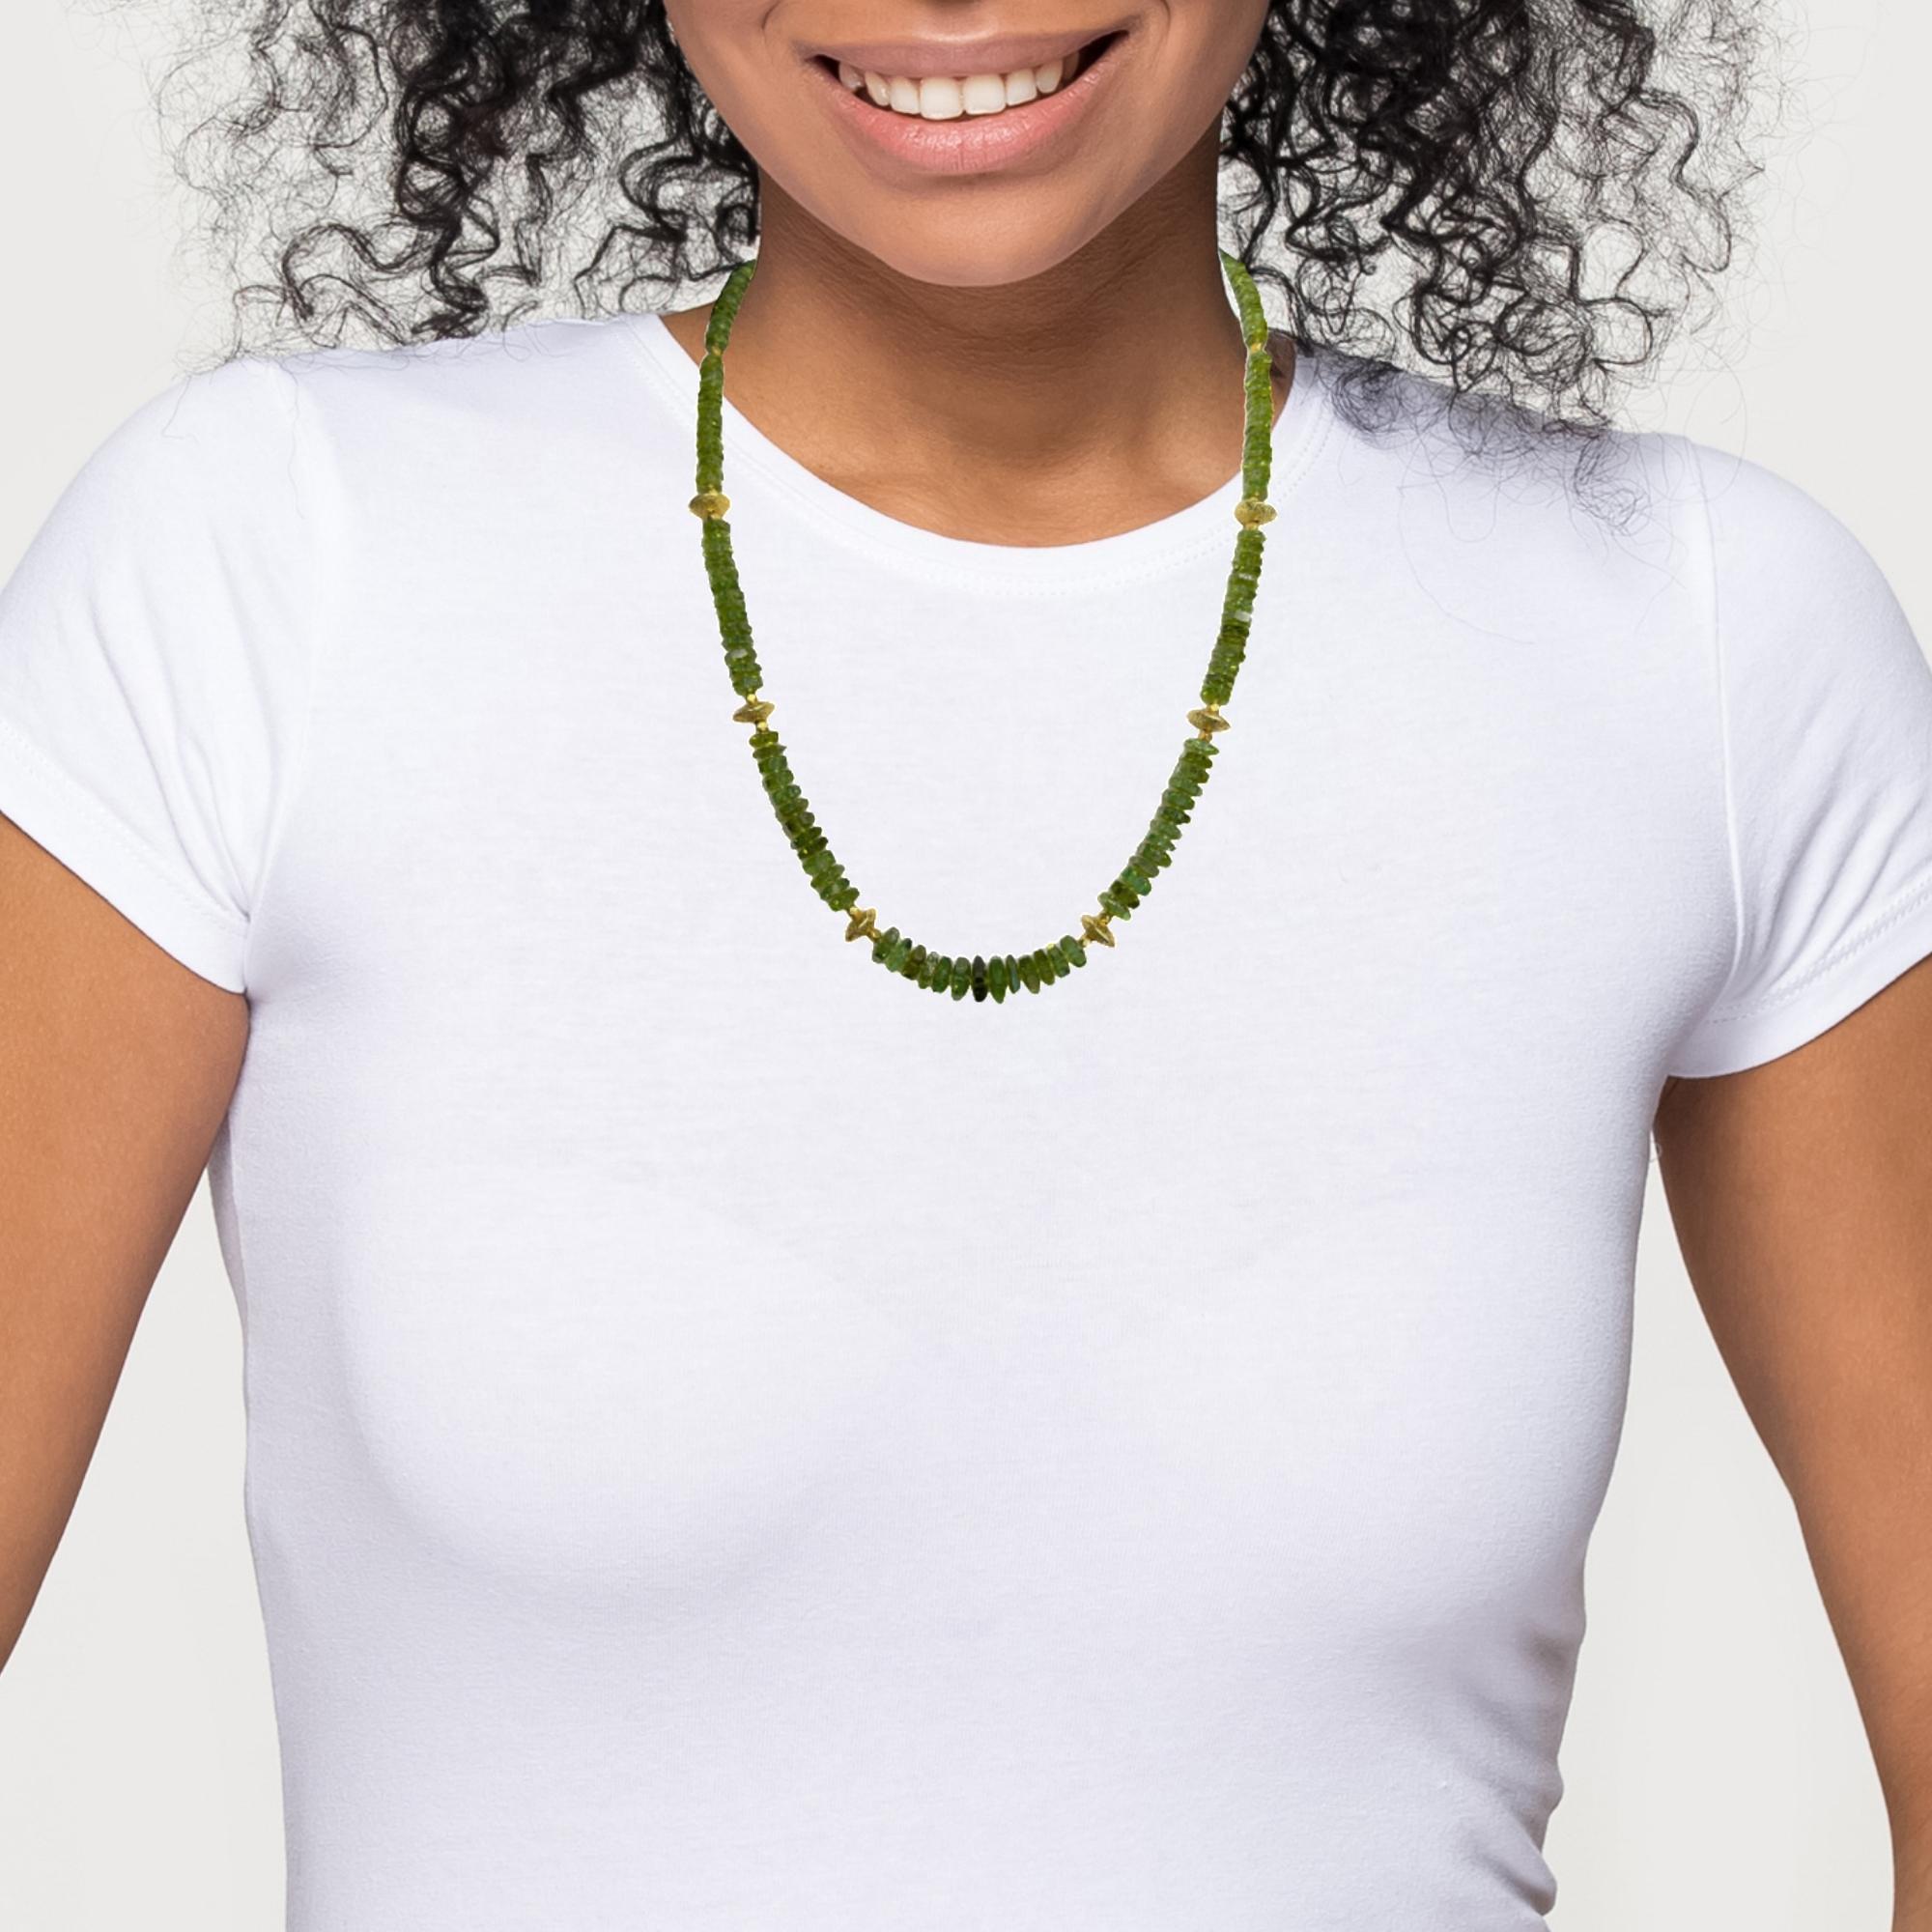 Green Tourmaline Bead and 18k Yellow Gold Necklace, Adjustable Length For Sale 8